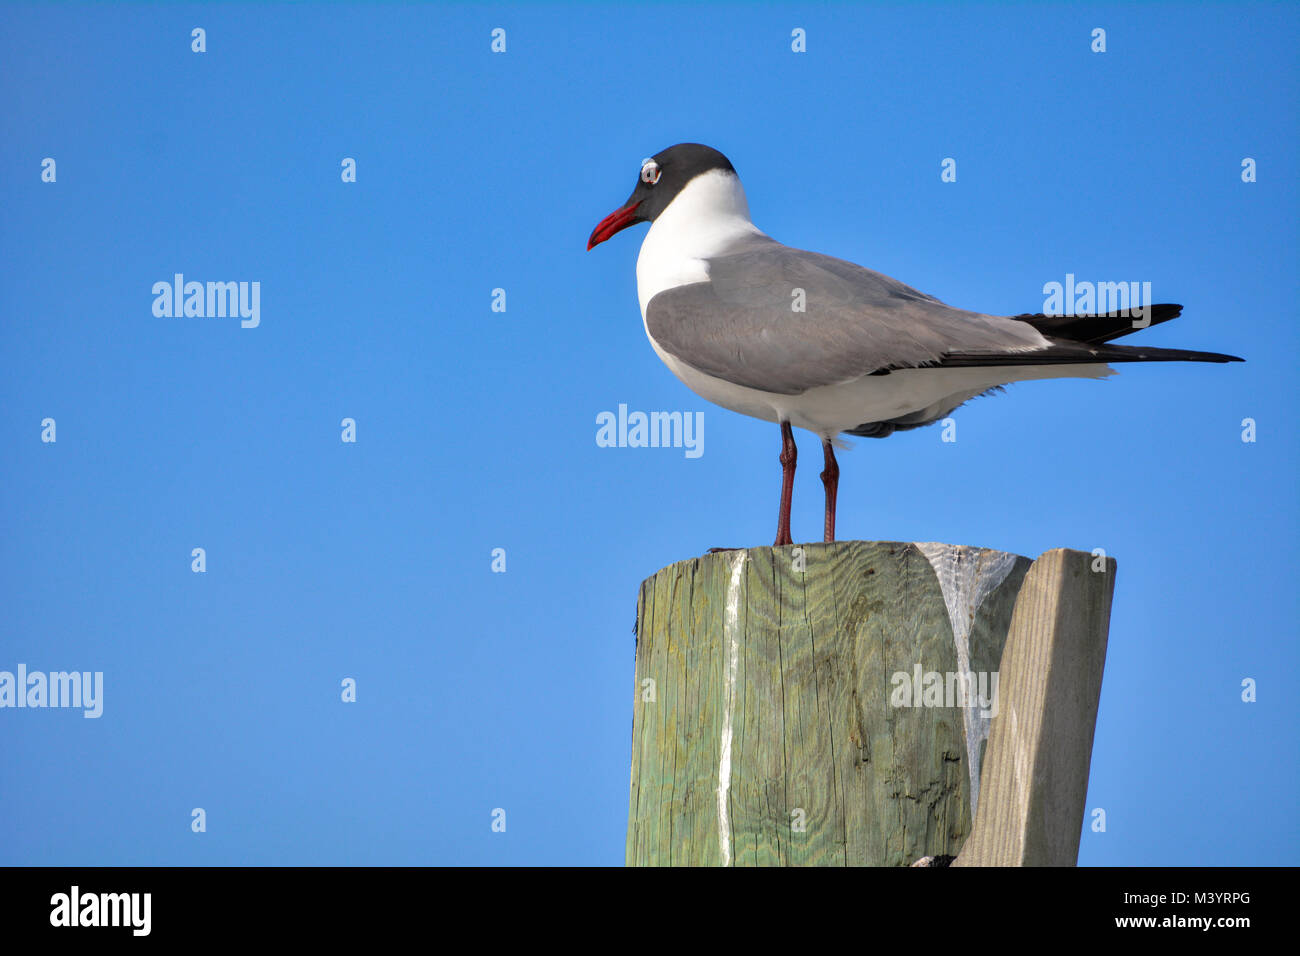 Black Headed Gull scanning from a vantage point, searching for its next meal. Stock Photo